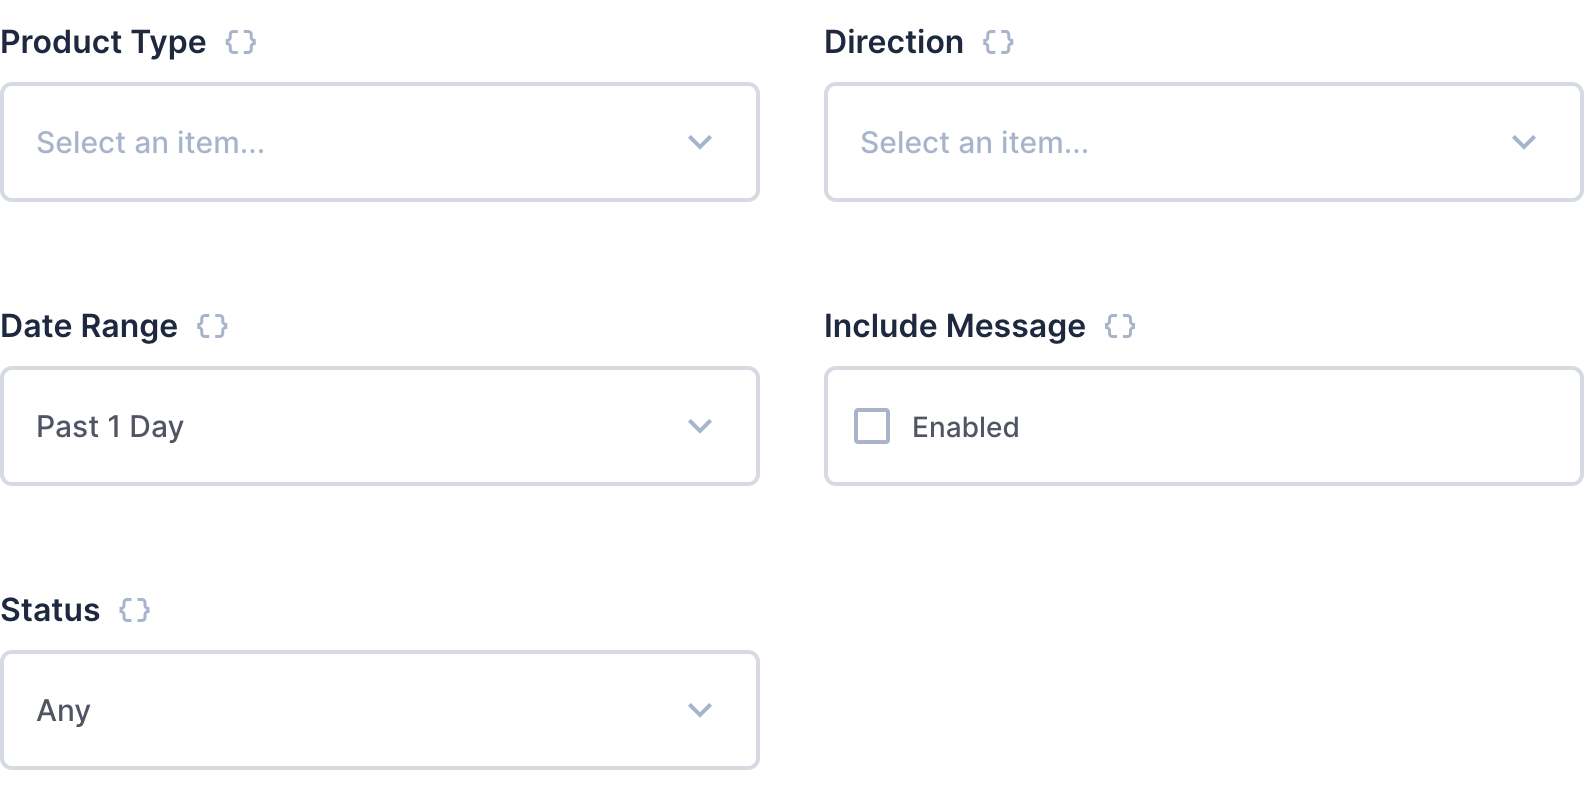 Form shows product type dropdown, direction dropdown, date range dropdown, included message checkbox, and status dropdown.